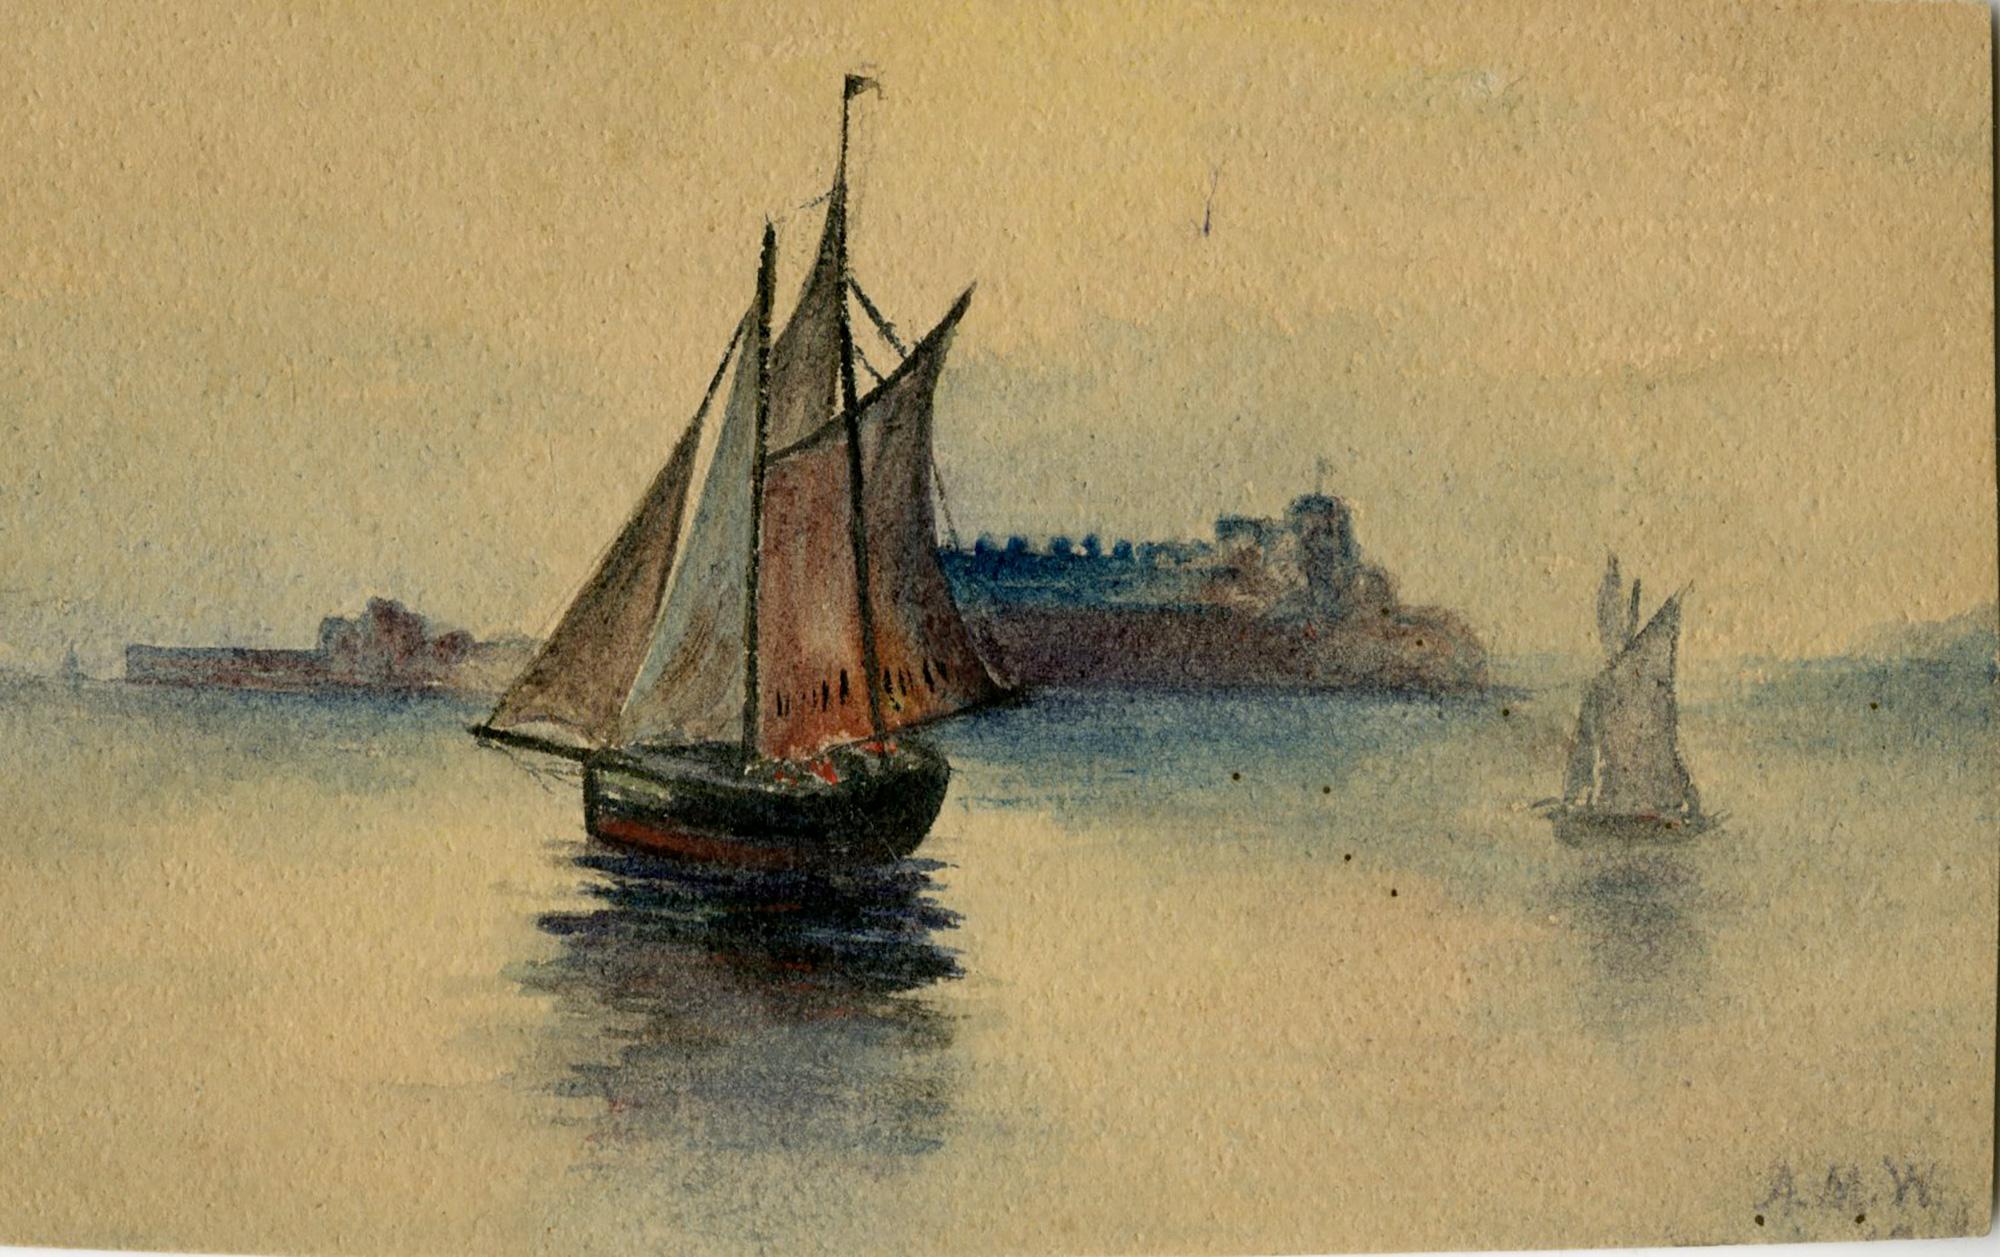 Anna May Walling Landscape Art - Schooners along the Hudson, West Point Academy in the distance.